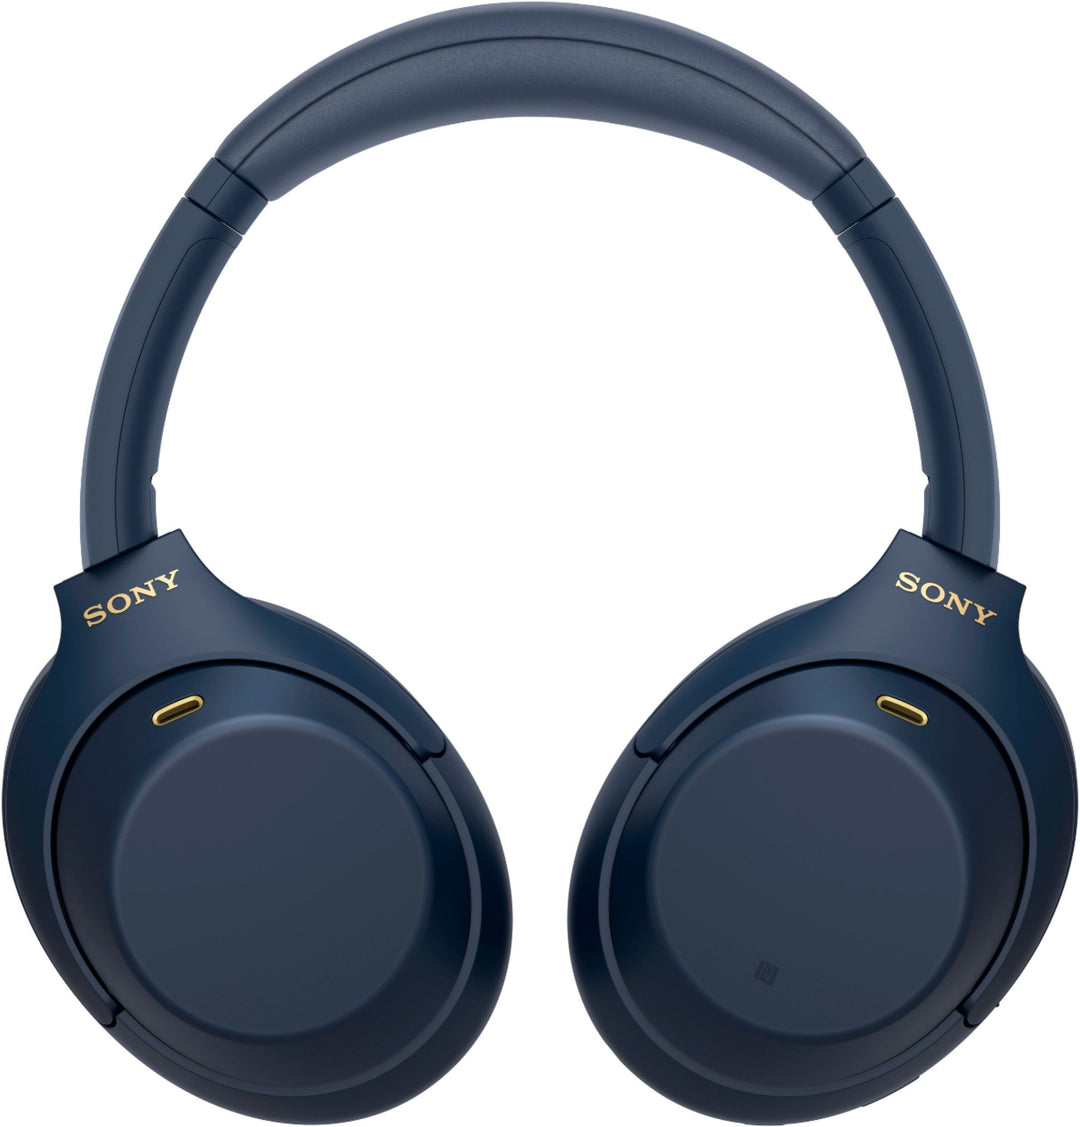 Sony - WH-1000XM4 Wireless Noise-Cancelling Over-the-Ear Headphones - Midnight Blue_4